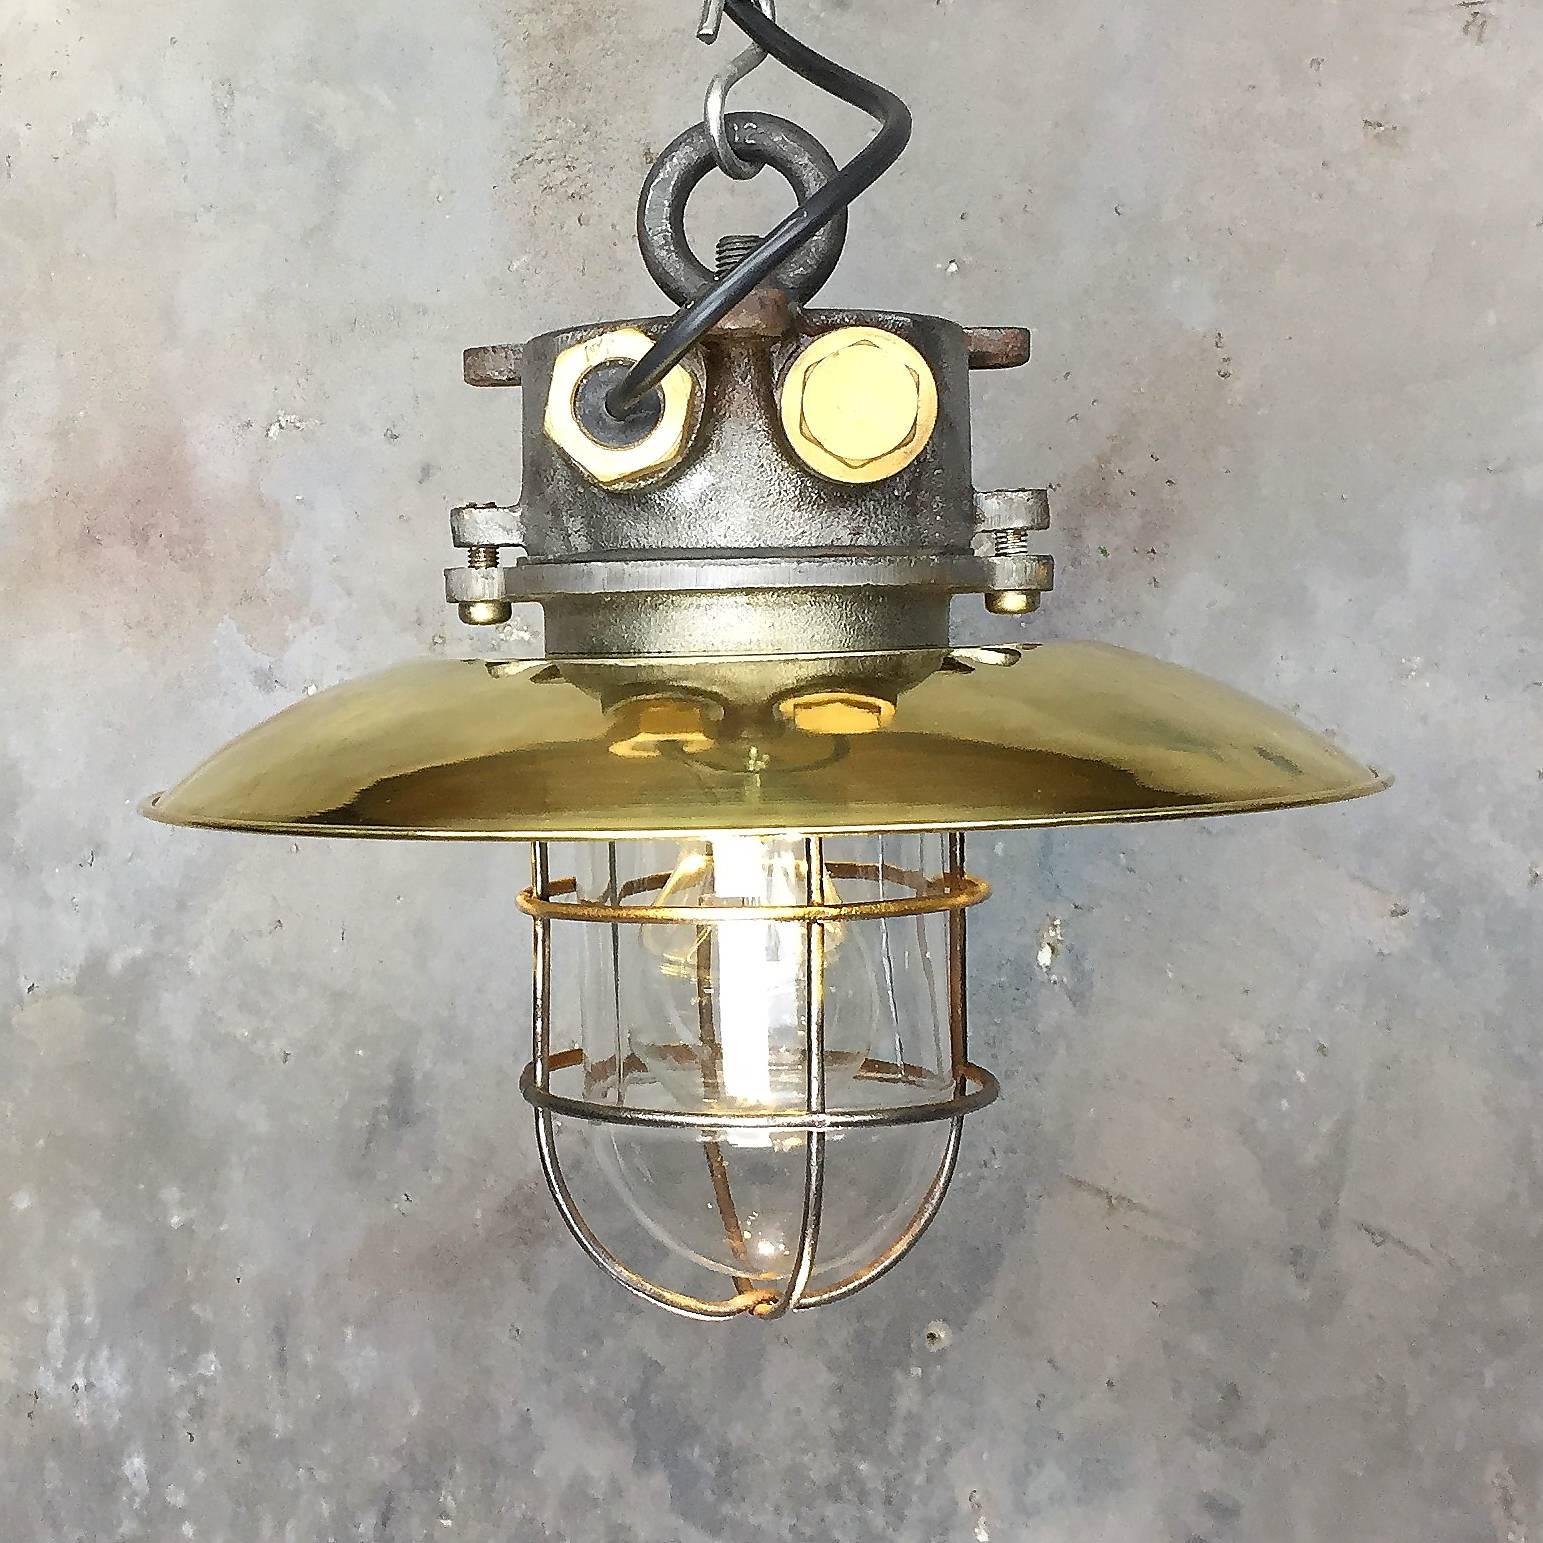 This excellent example of an original explosion proof lamp was salvaged from an old Japanese ship. Dated c1975, it has the original ceramic and brass E27 lamp holder which looks brand new, and is completely free from chips / damage.

Supplied with a